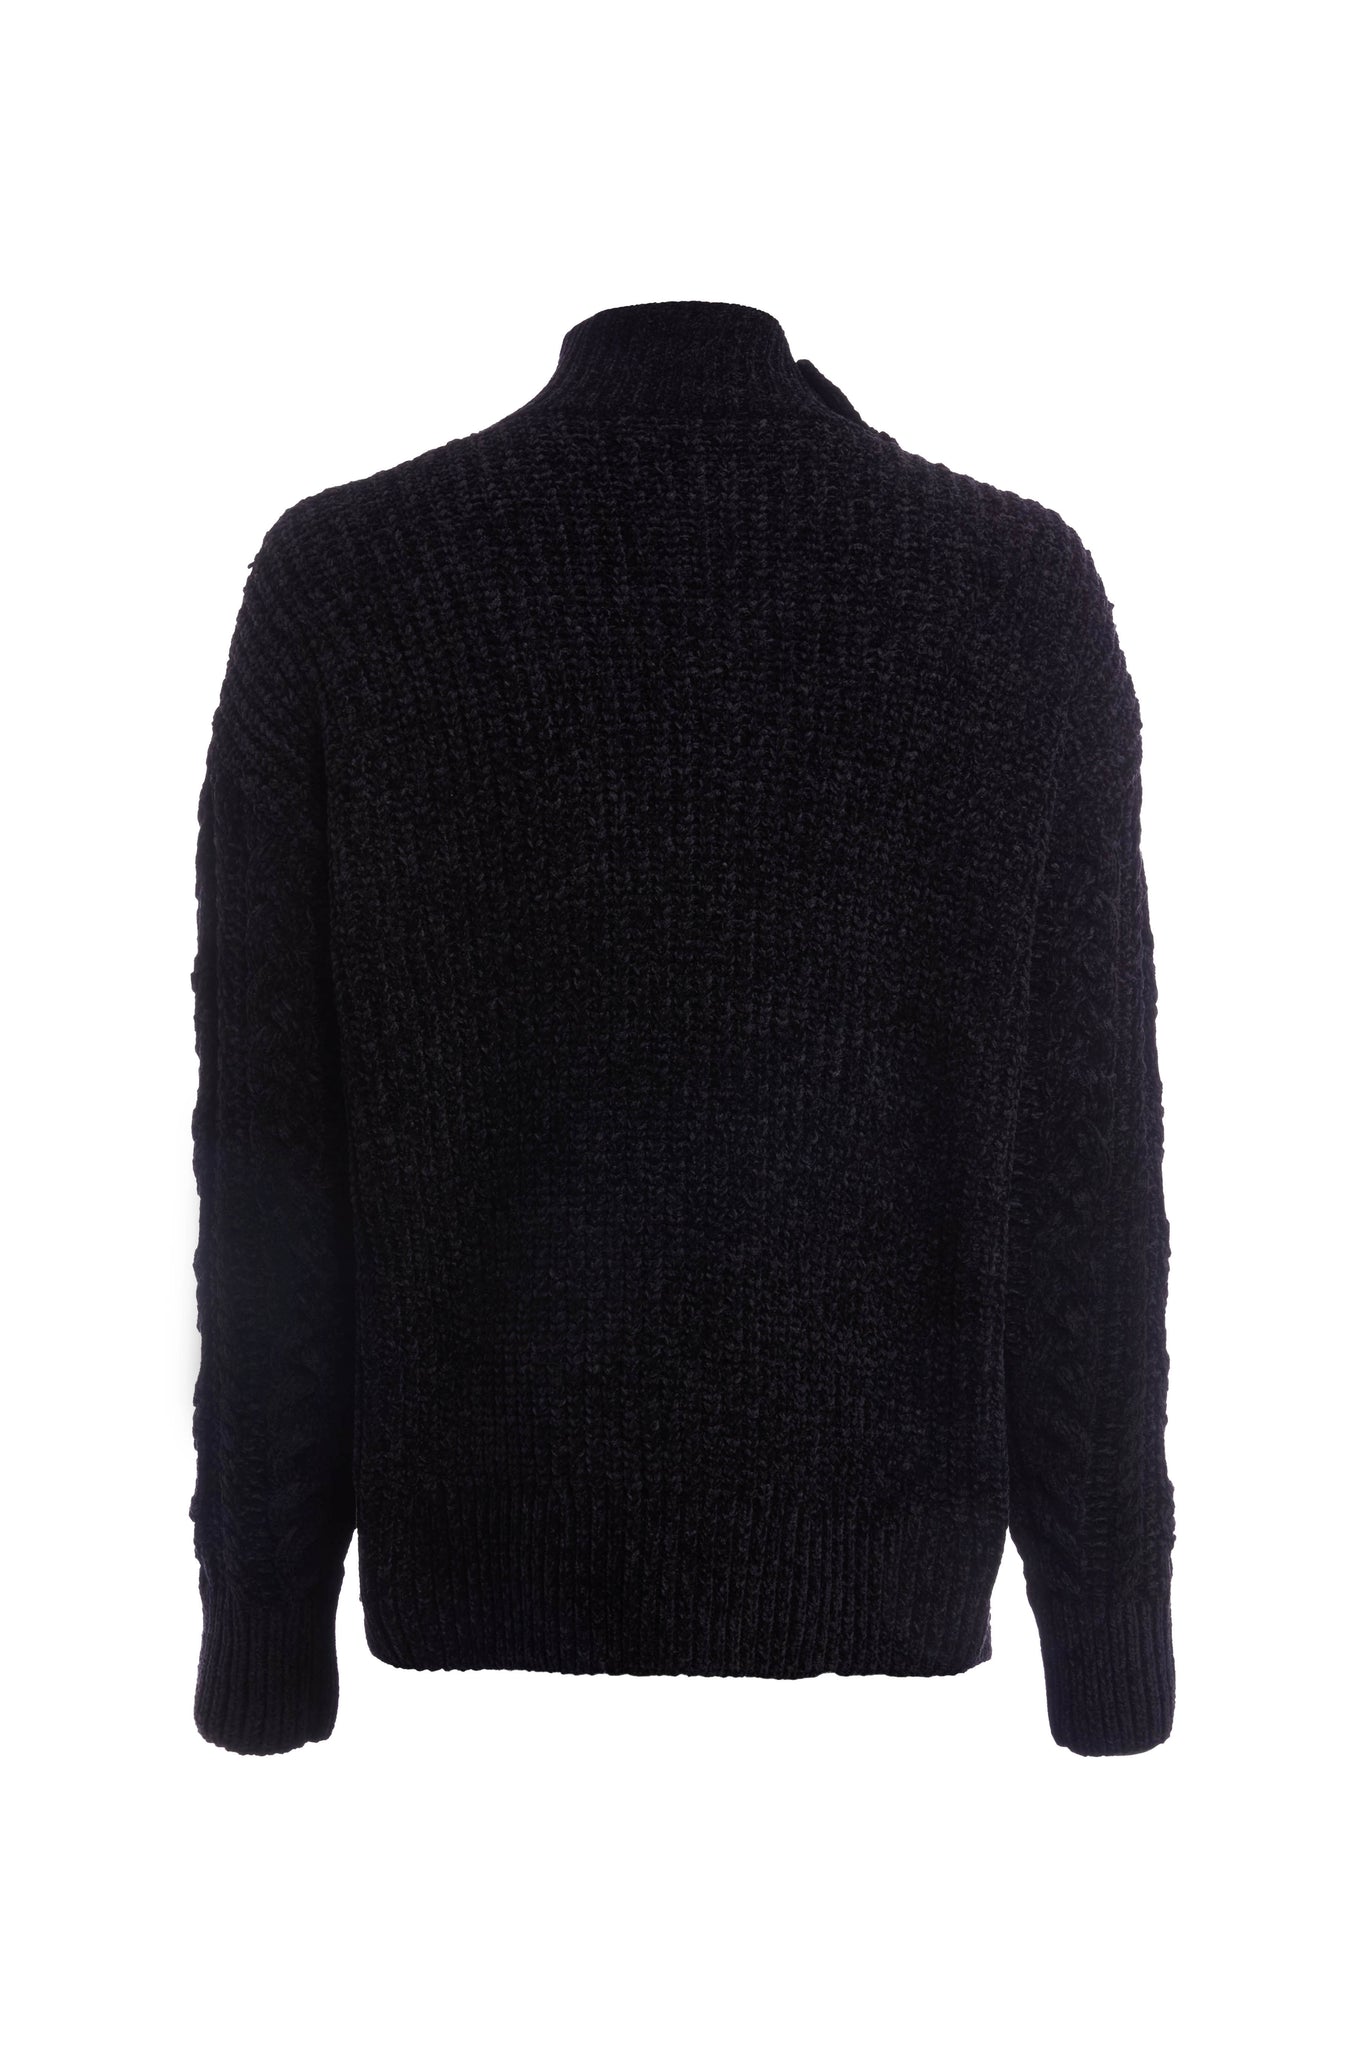 Brompton Cable Knit (Black) – Holland Cooper